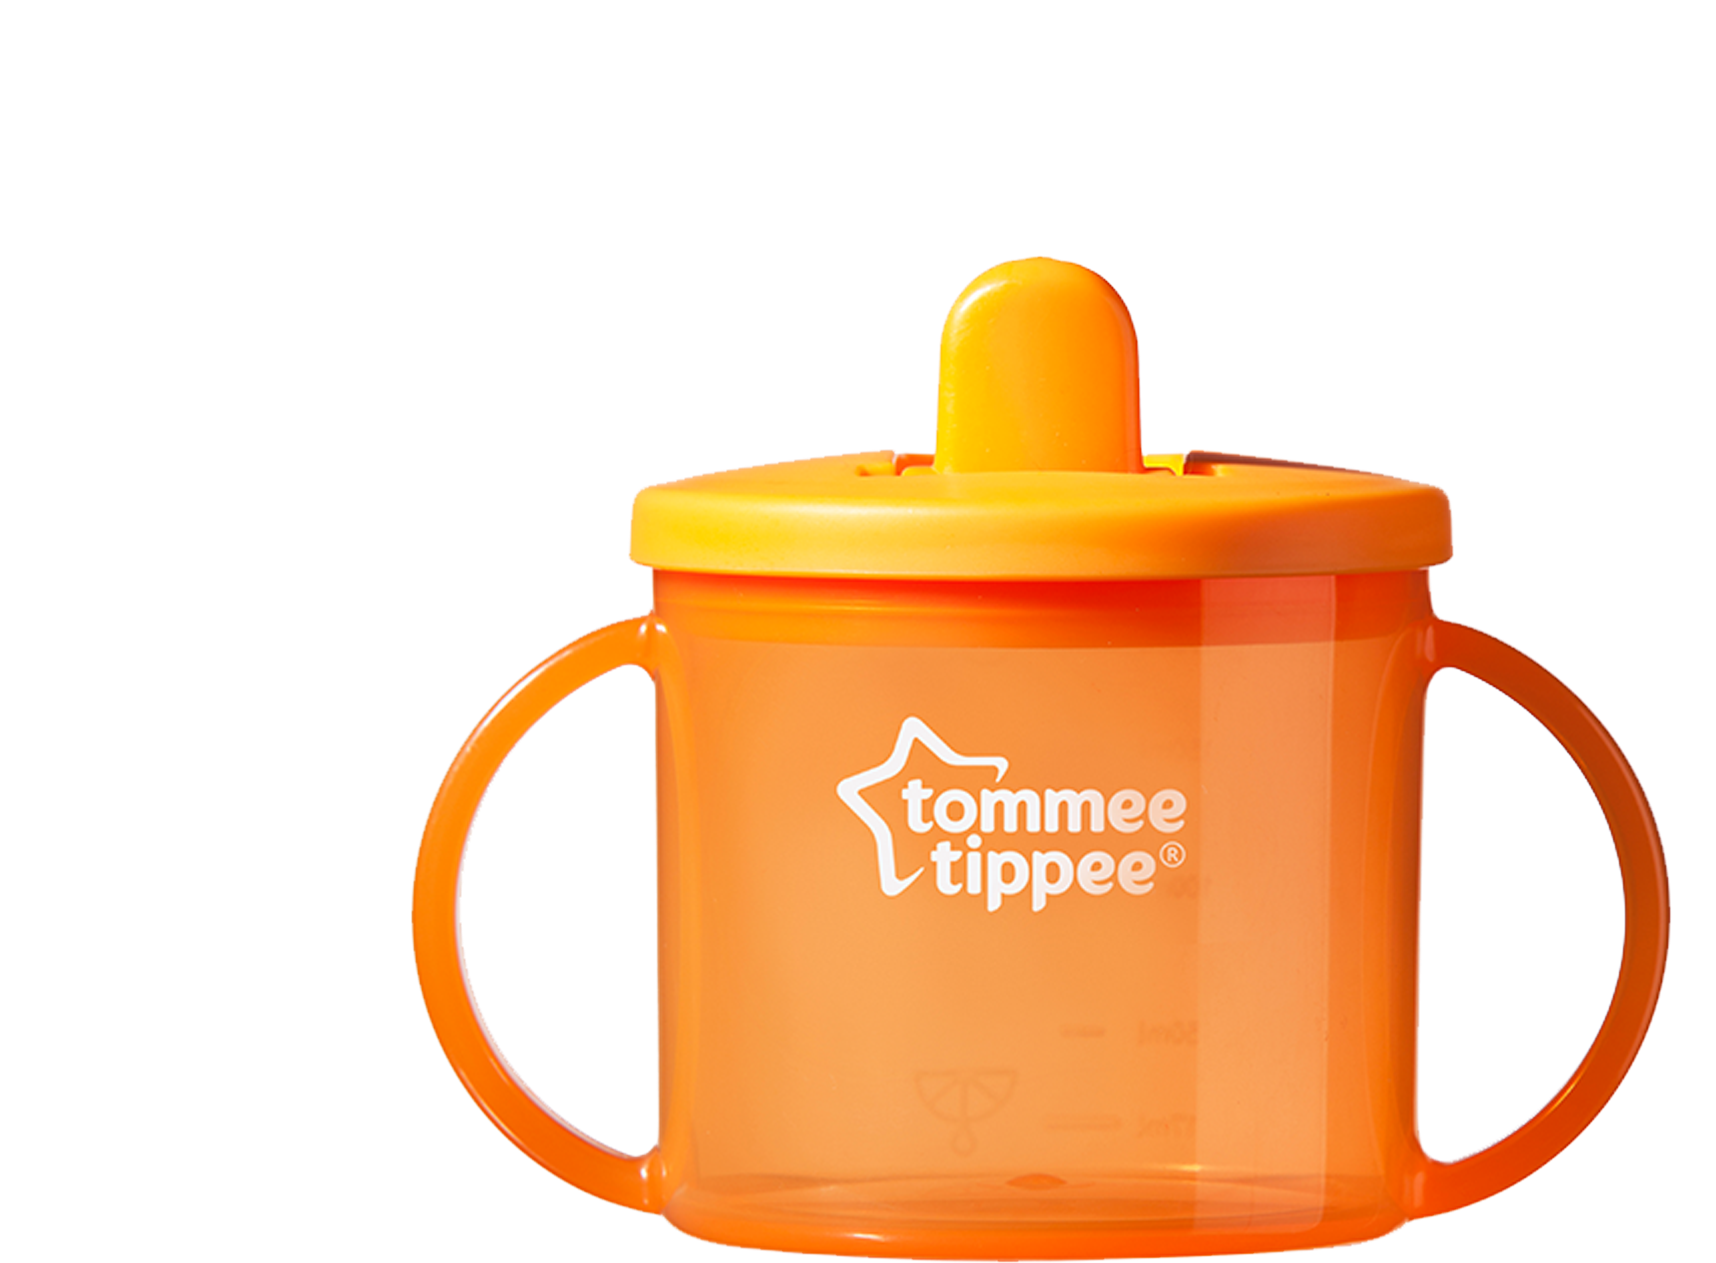 Tommee Tippee Sippy Cups Uk (2000x2000)